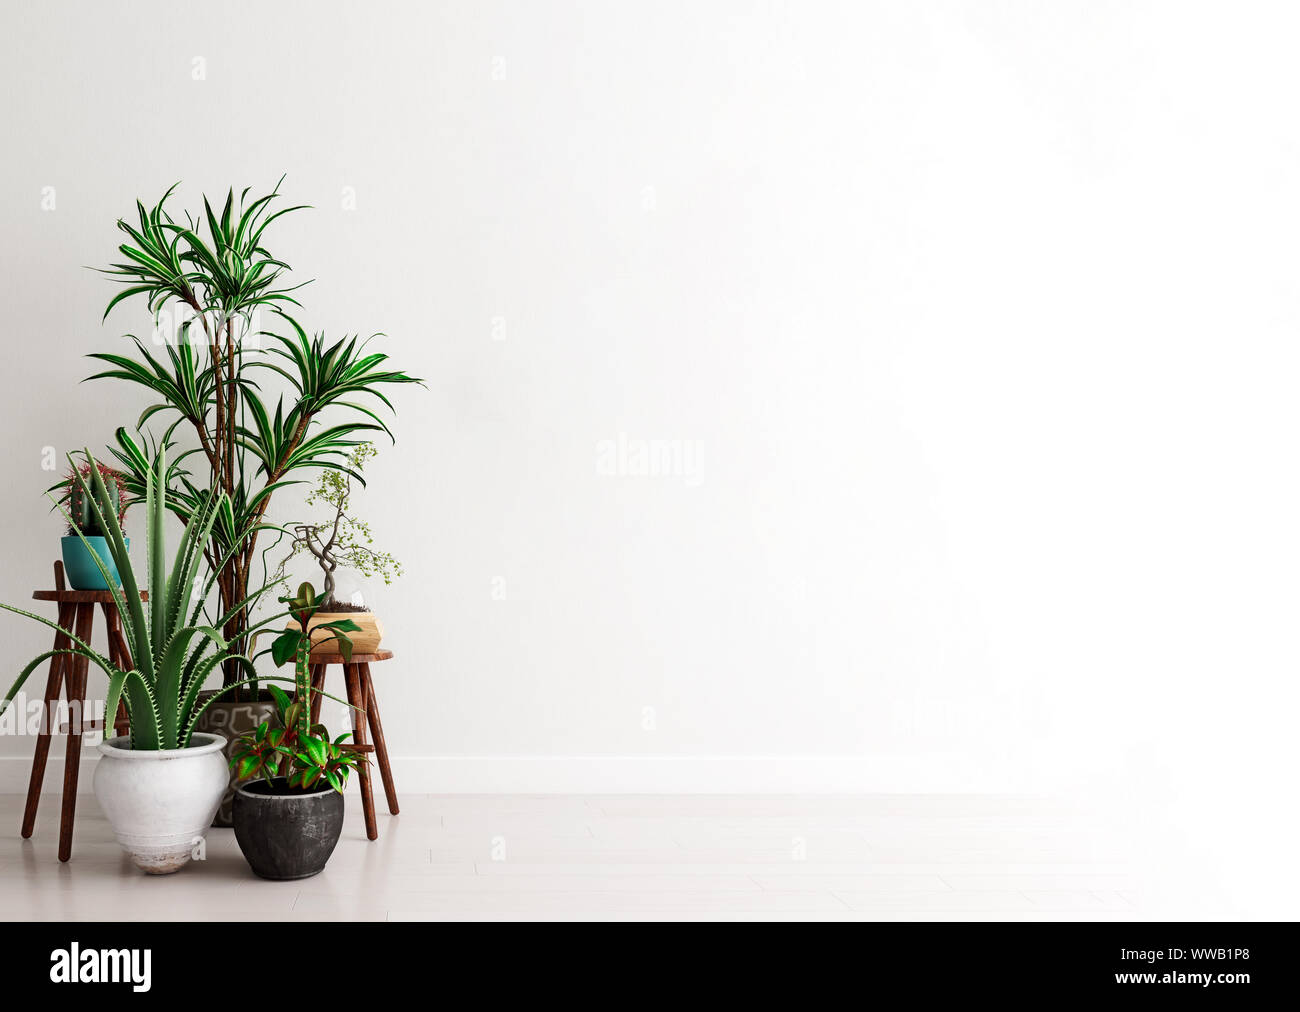 Mock up wall with group of potted house plants in modern interior background, moment for contemplation, Scandinavian style, 3D render, 3D illustration Stock Photo